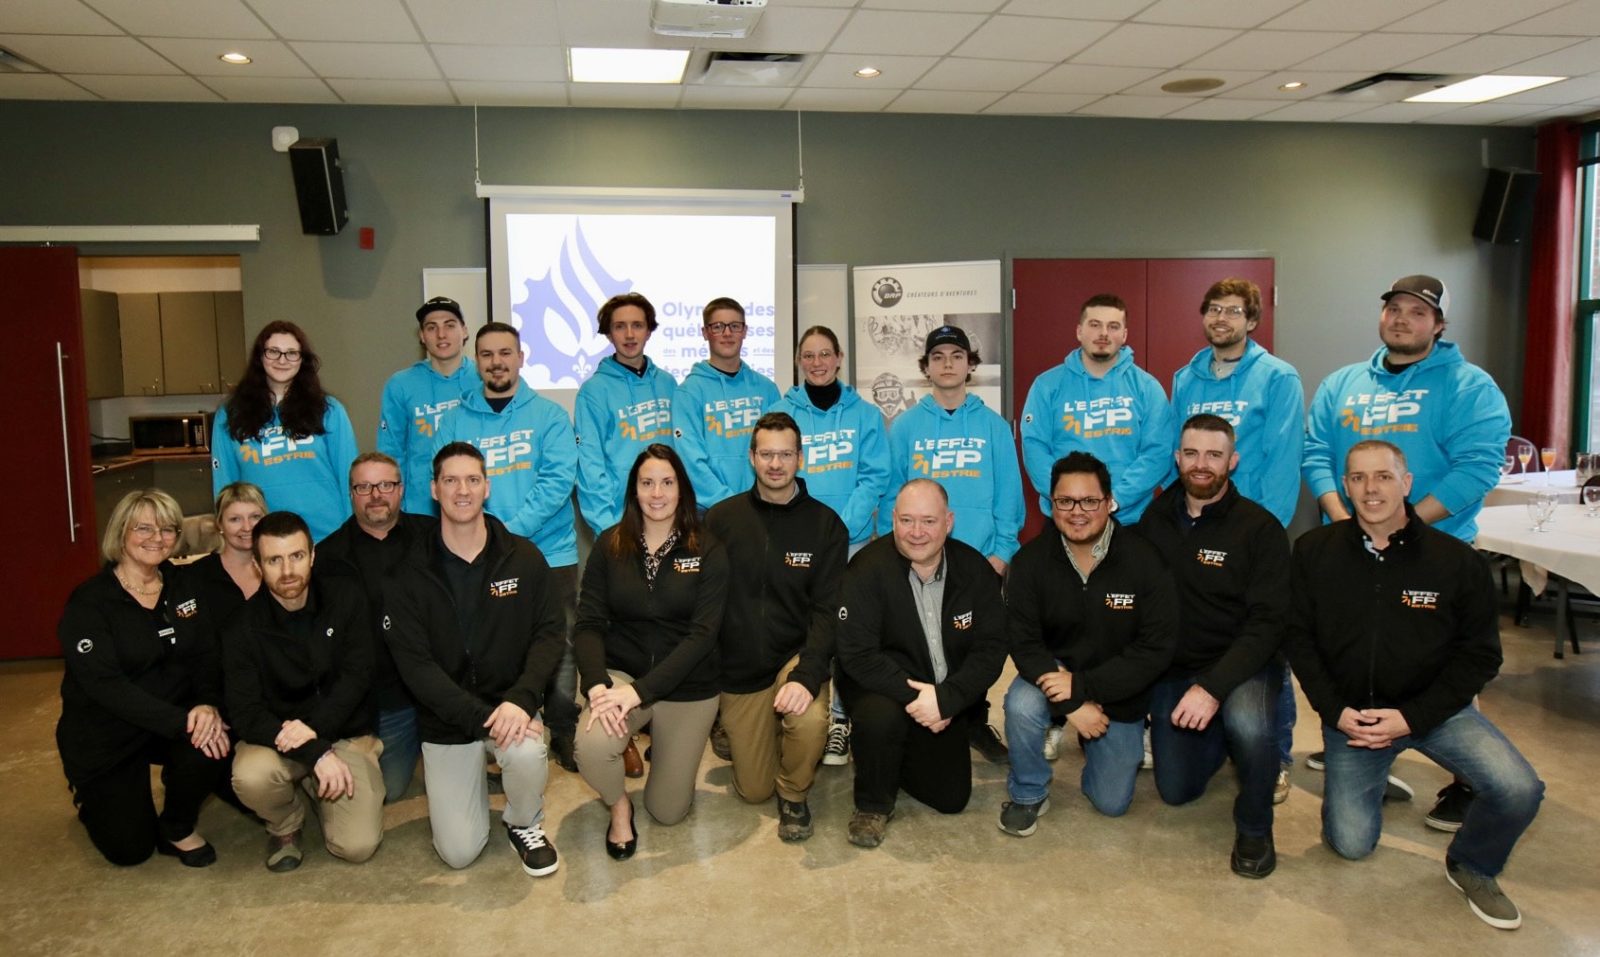 Members of Estrie team competing at the Olympiades Québécoises have been announced